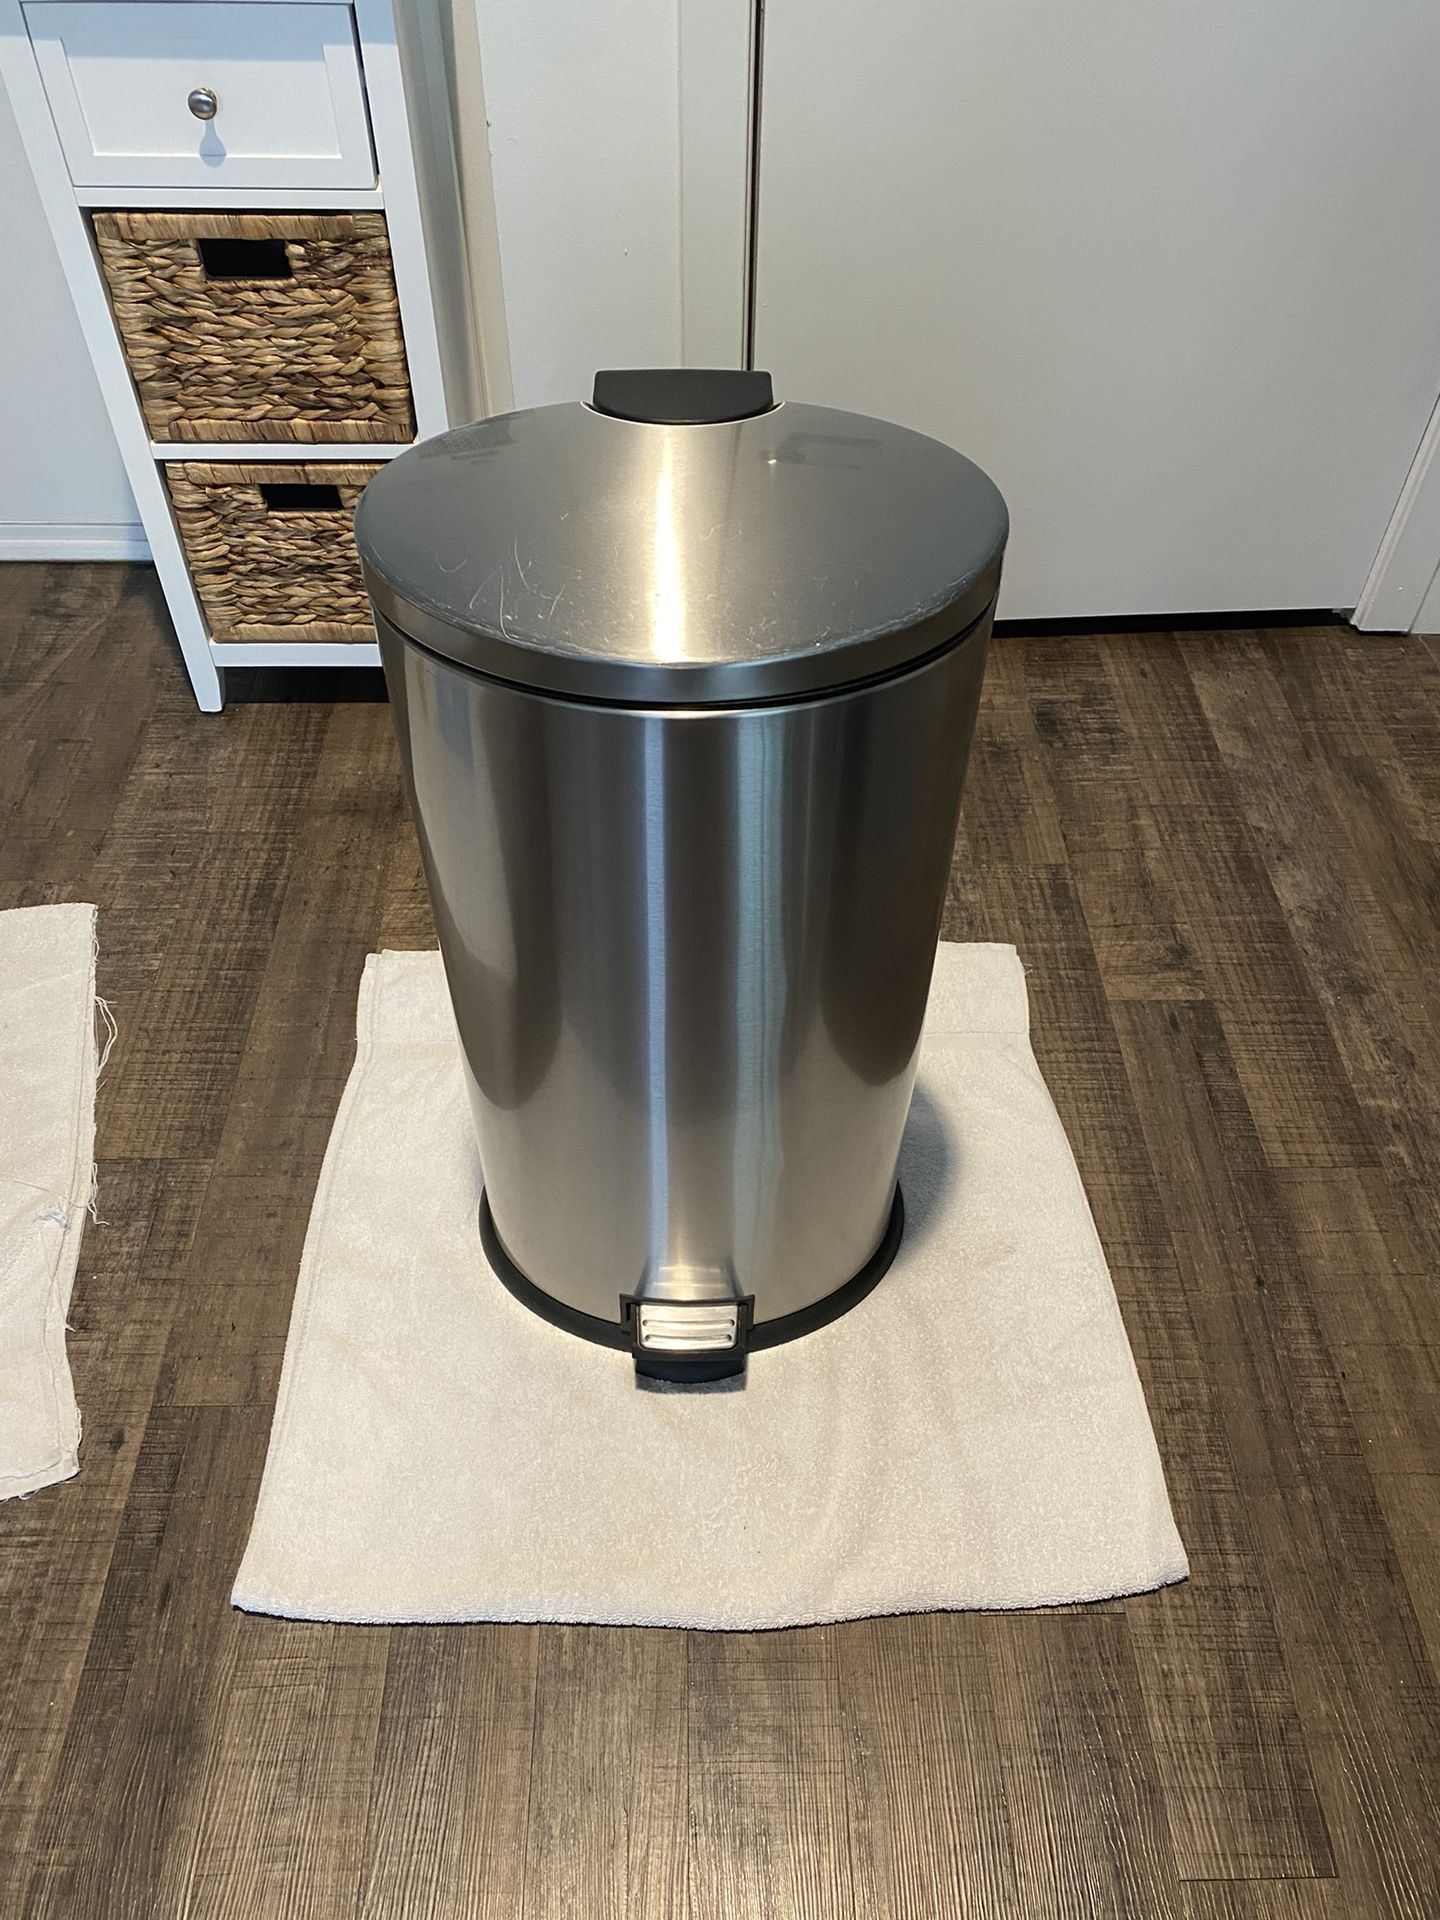 Stainless steel trash Can 